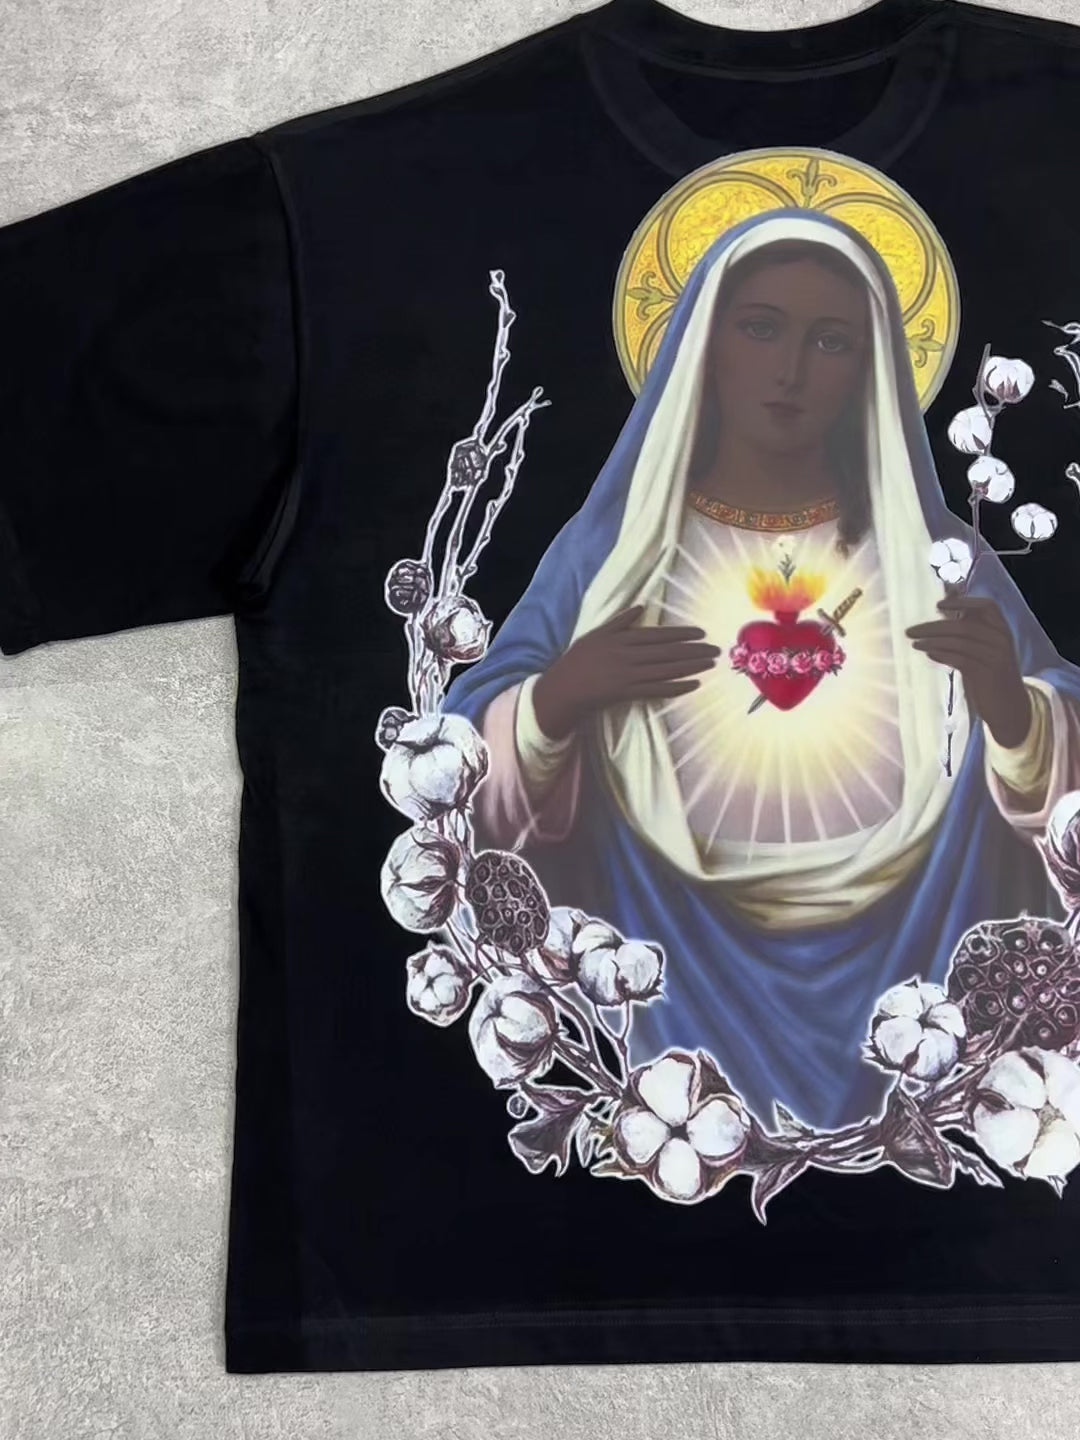 OBSTACLES & DANGERS© The Black Madonna and Cotton Black/White Art T-Shirt